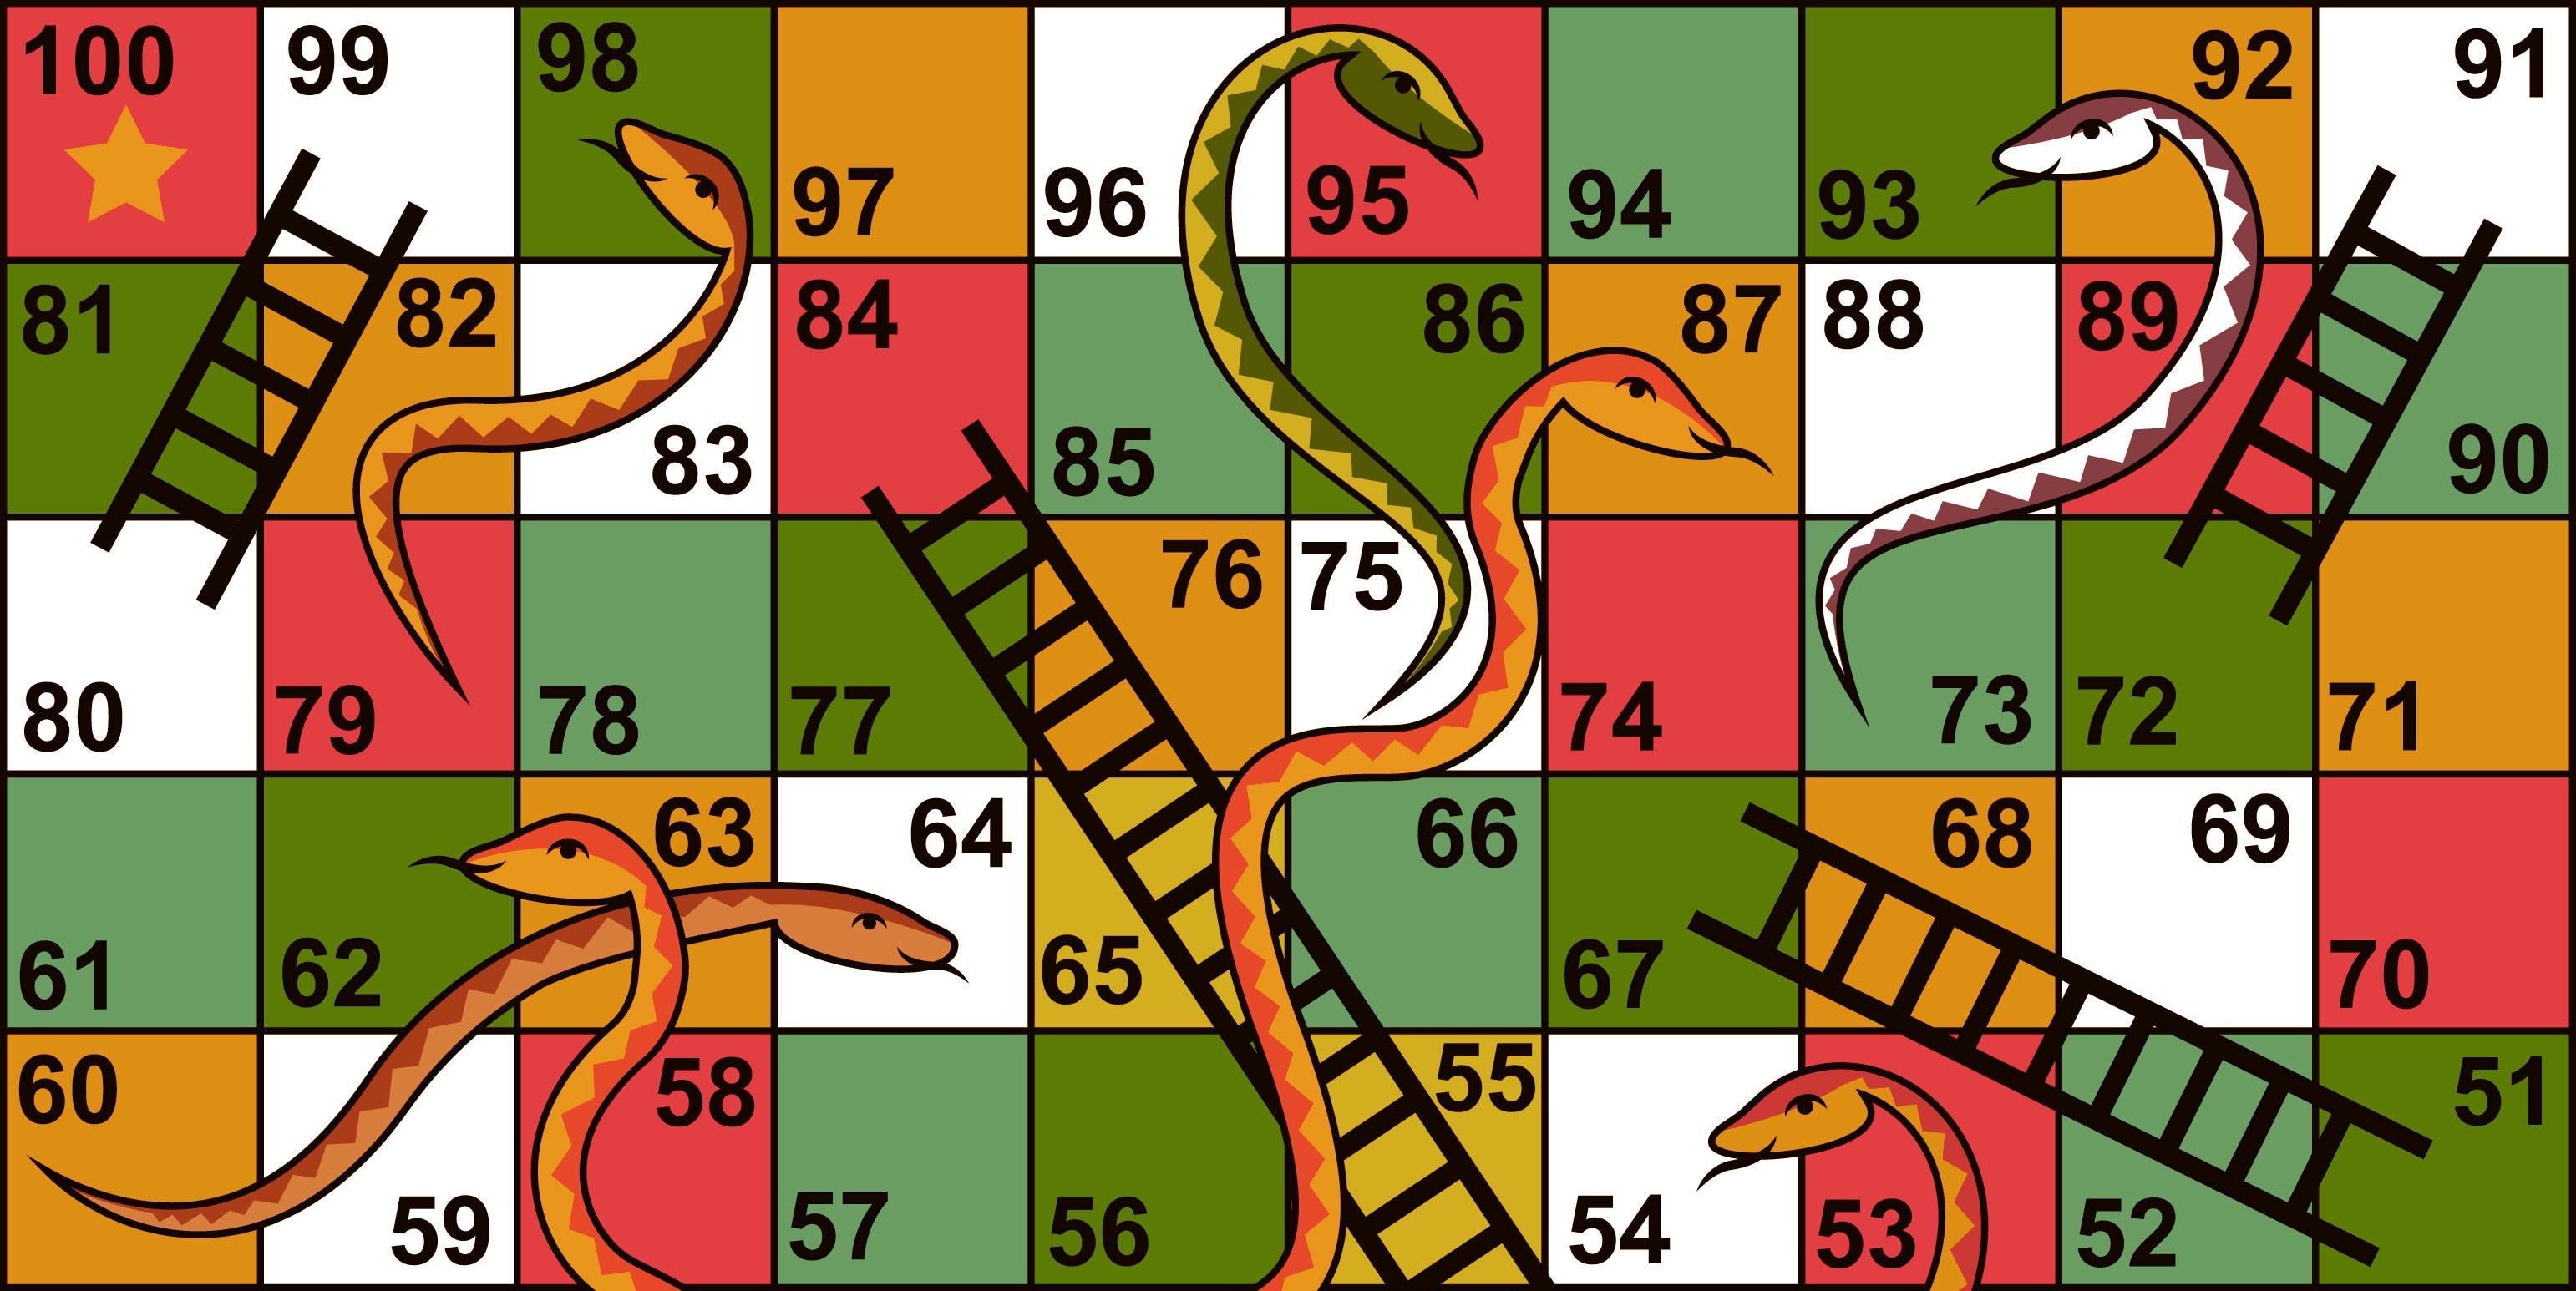 Life - A game of Snakes and Ladders - Author's life experiences